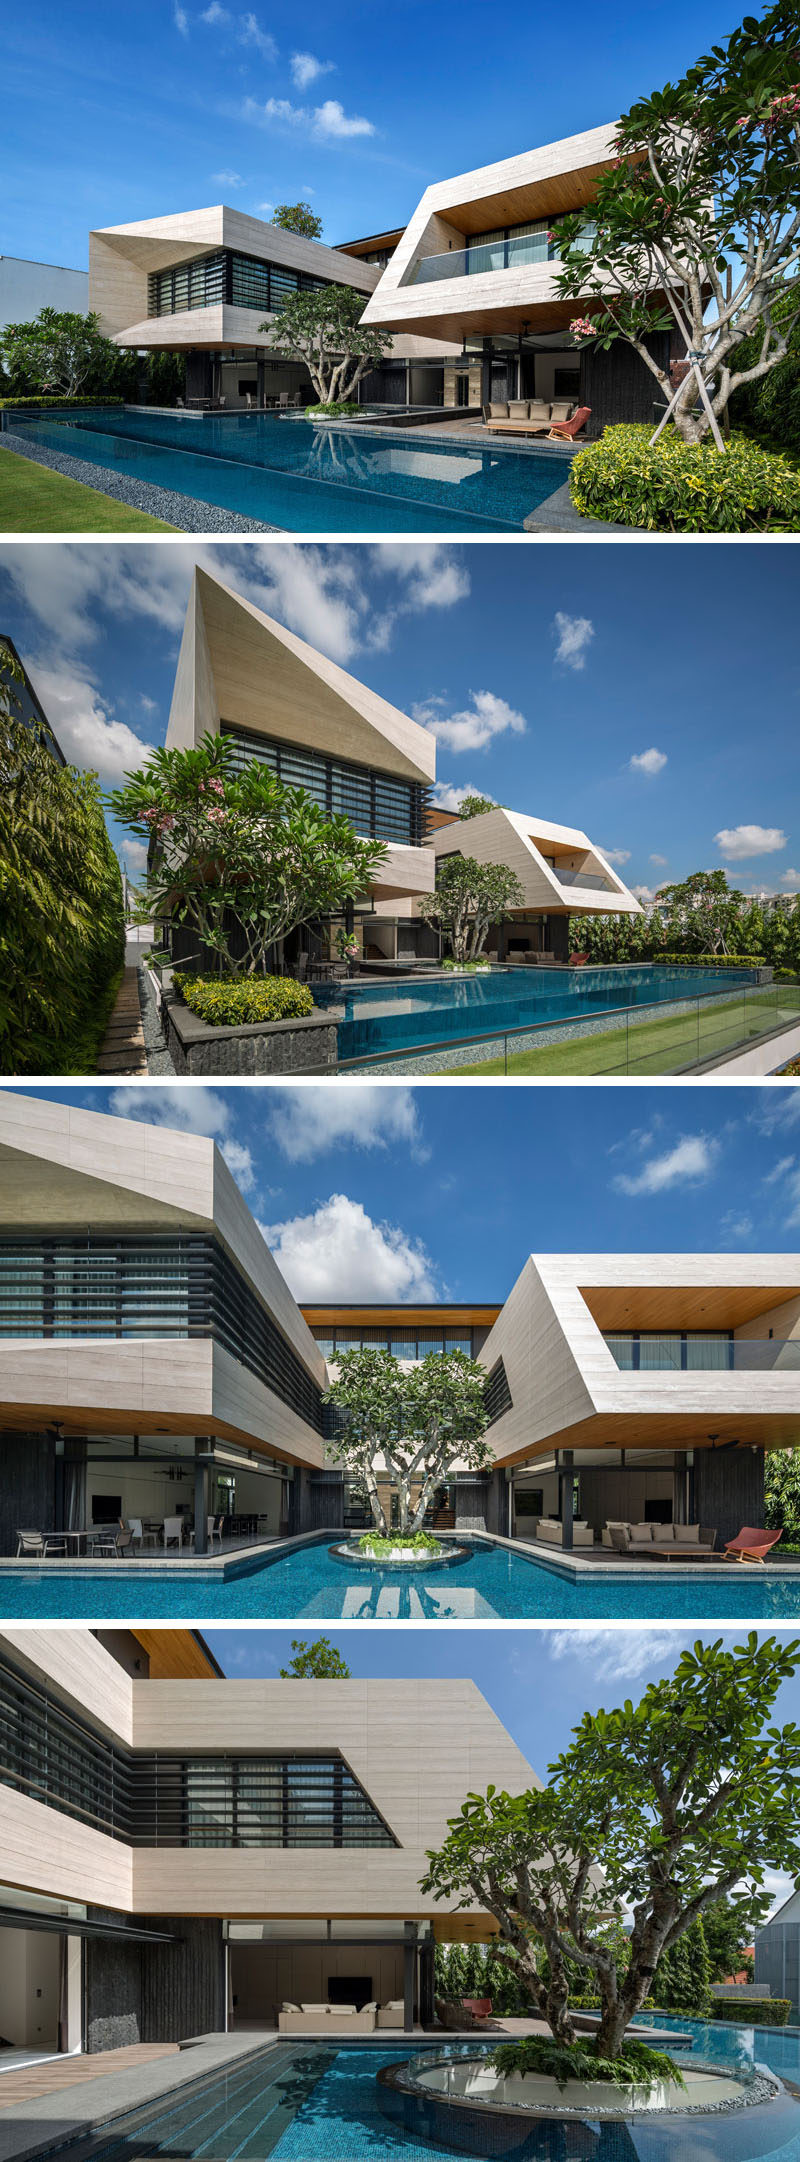 modern-house-design-with-swimming-pool-090418-1211-06-800x2162